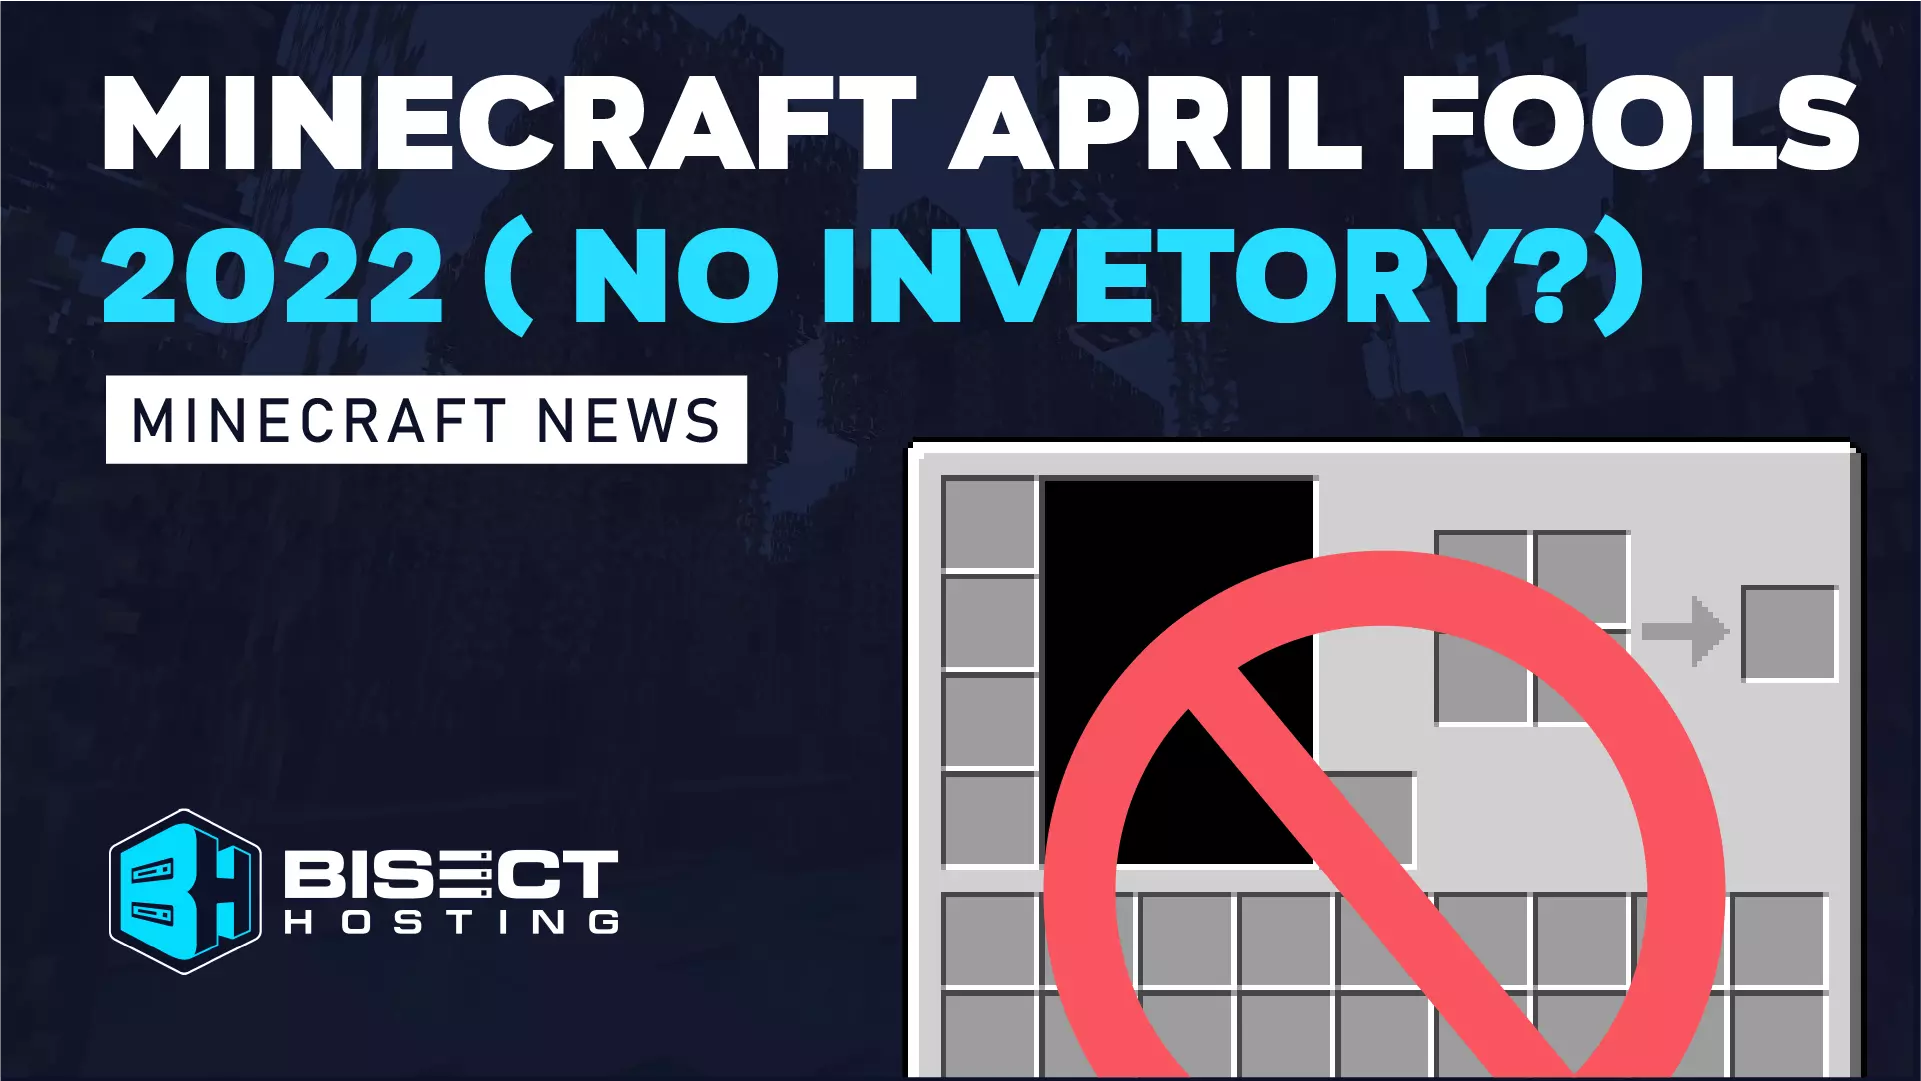 Minecraft April Fools 2022 - Player Inventories Have Been Removed!